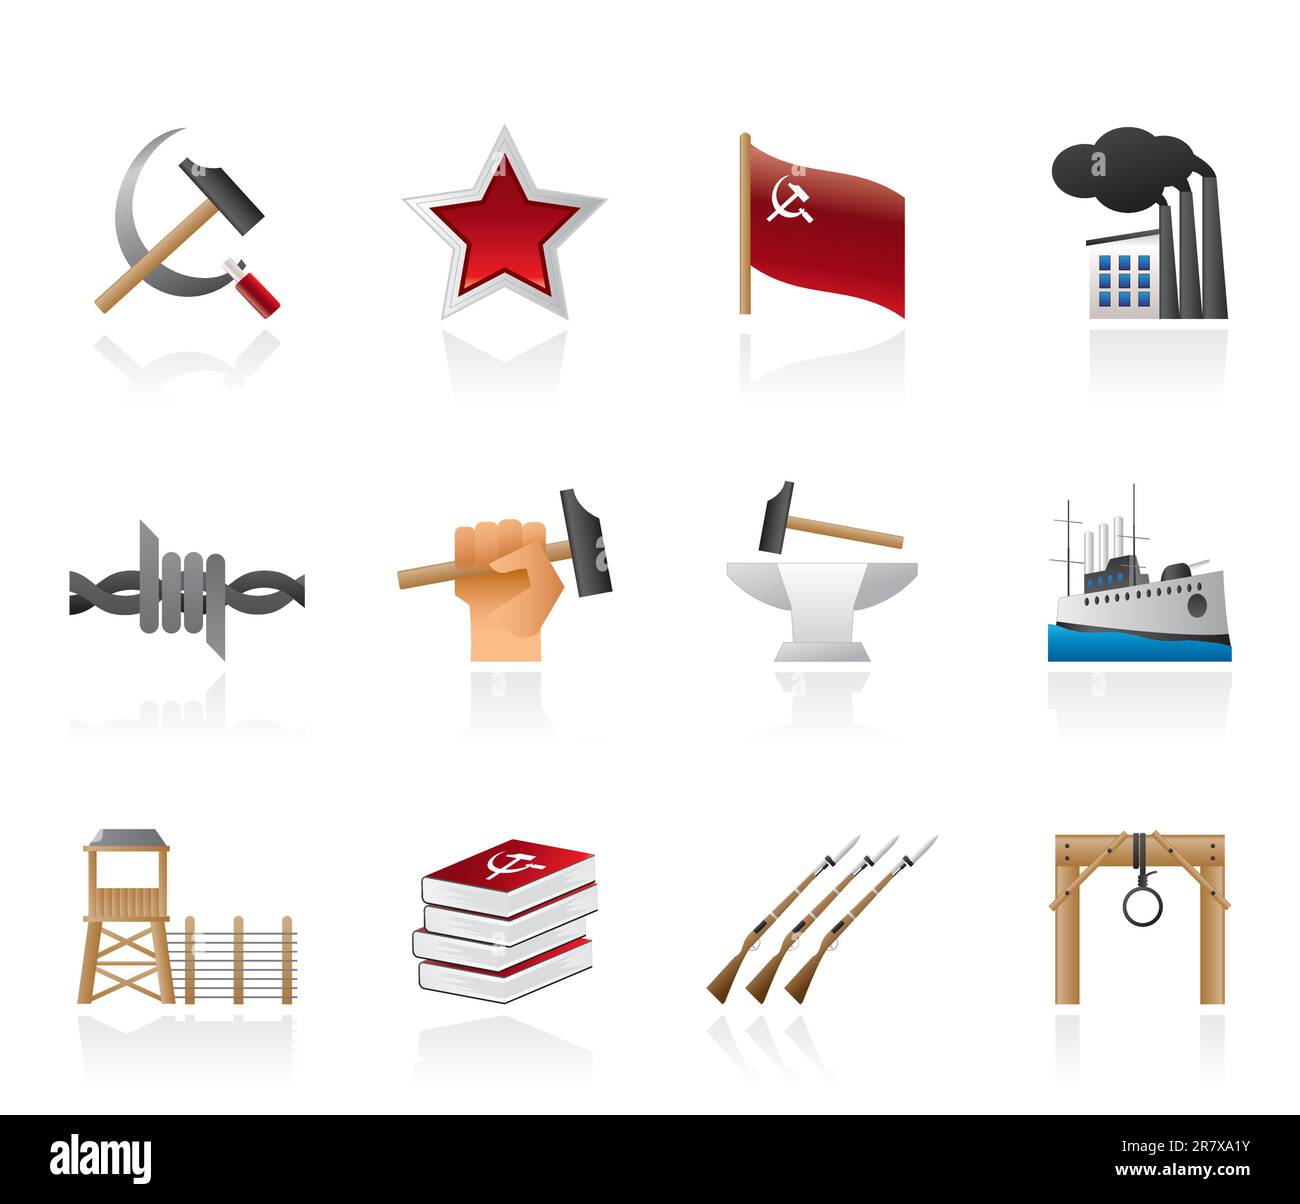 Communism, socialism and revolution icons - vector icon set Stock Vector